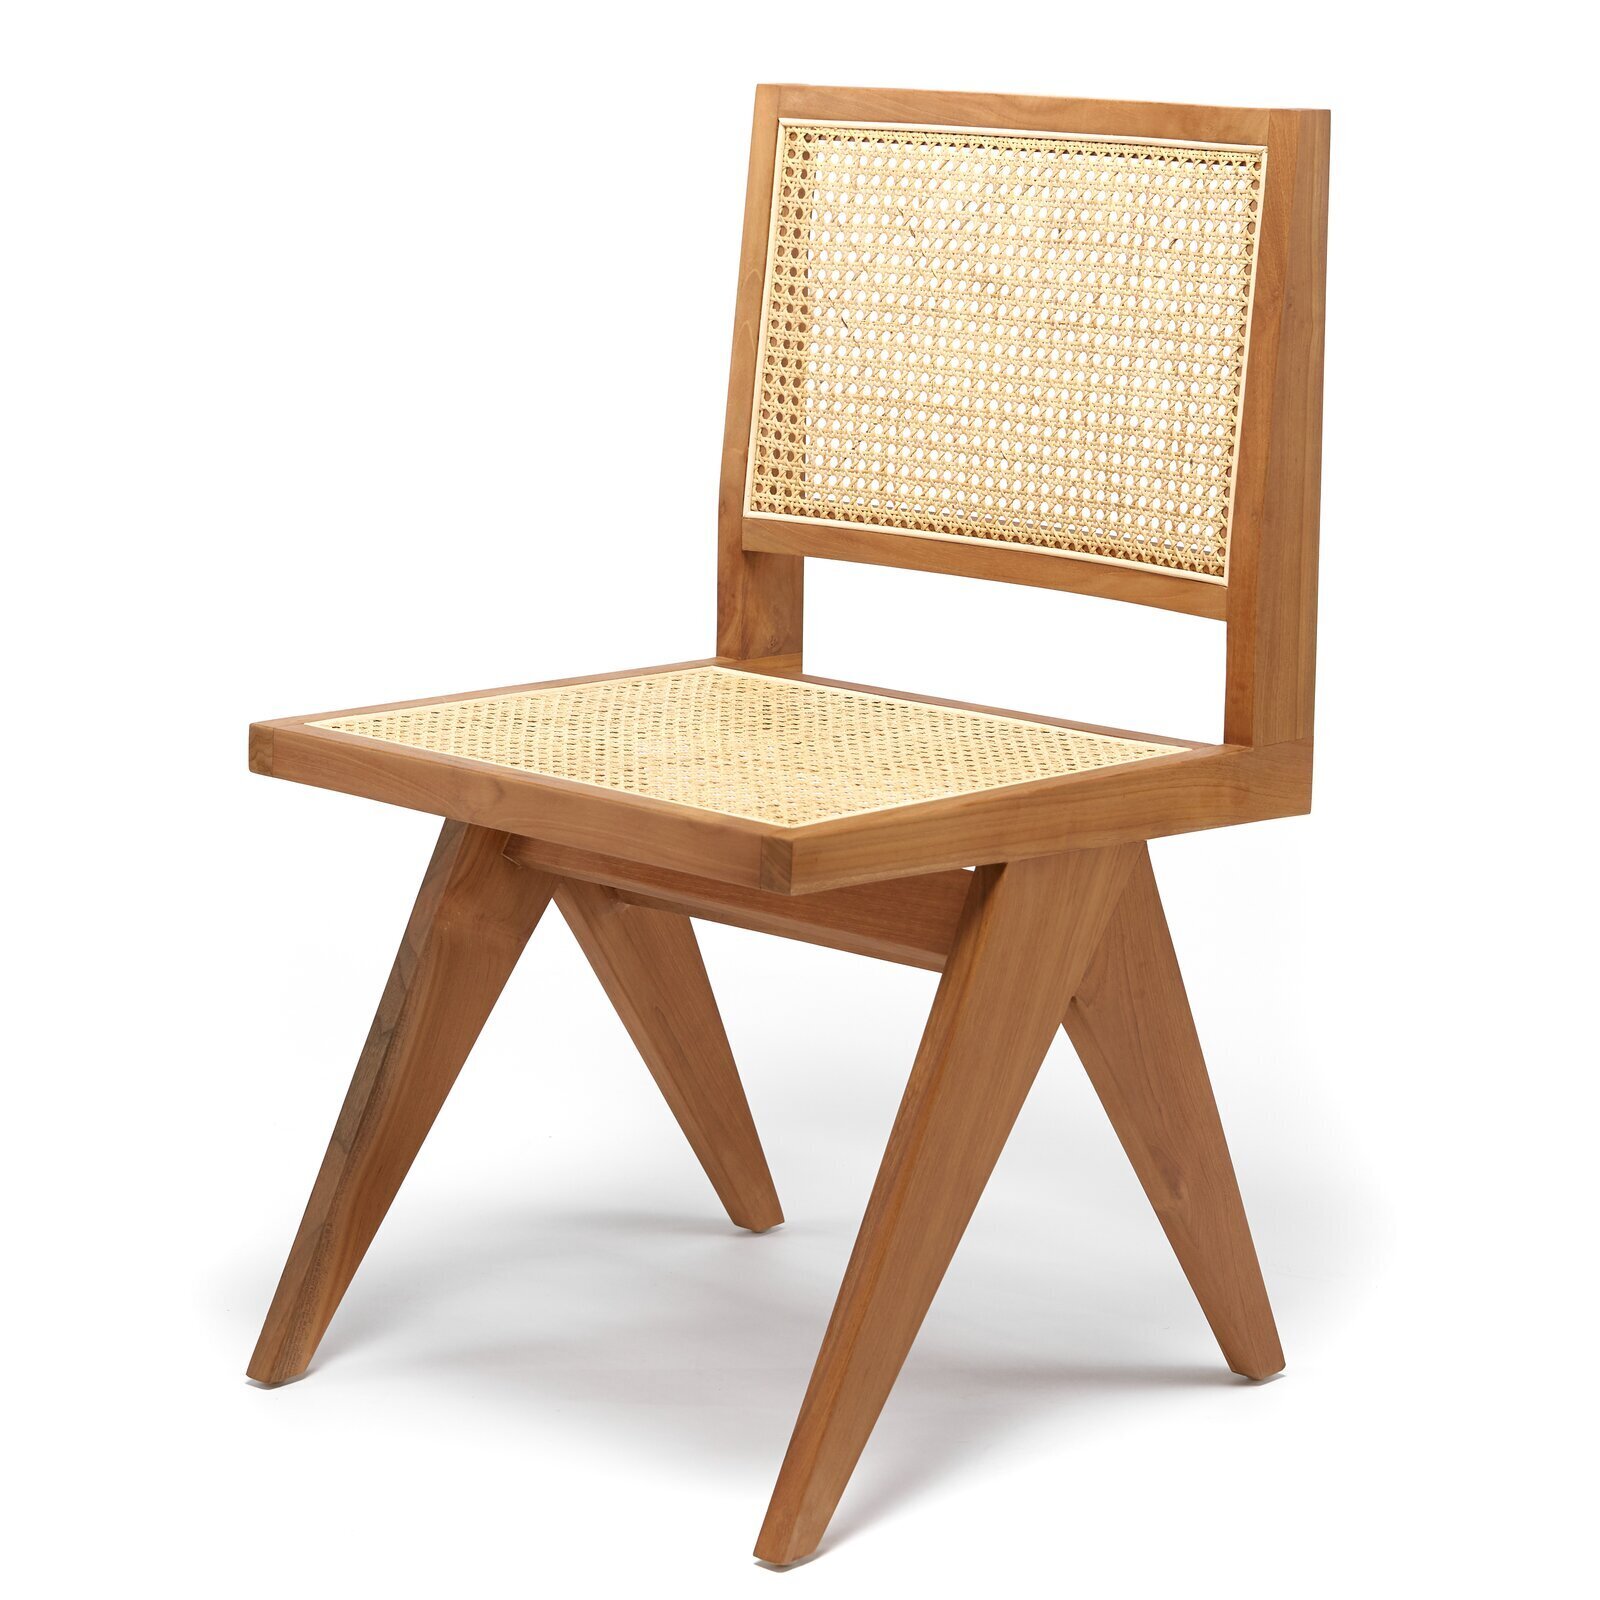 Cane Inset Japandi Dining Chair